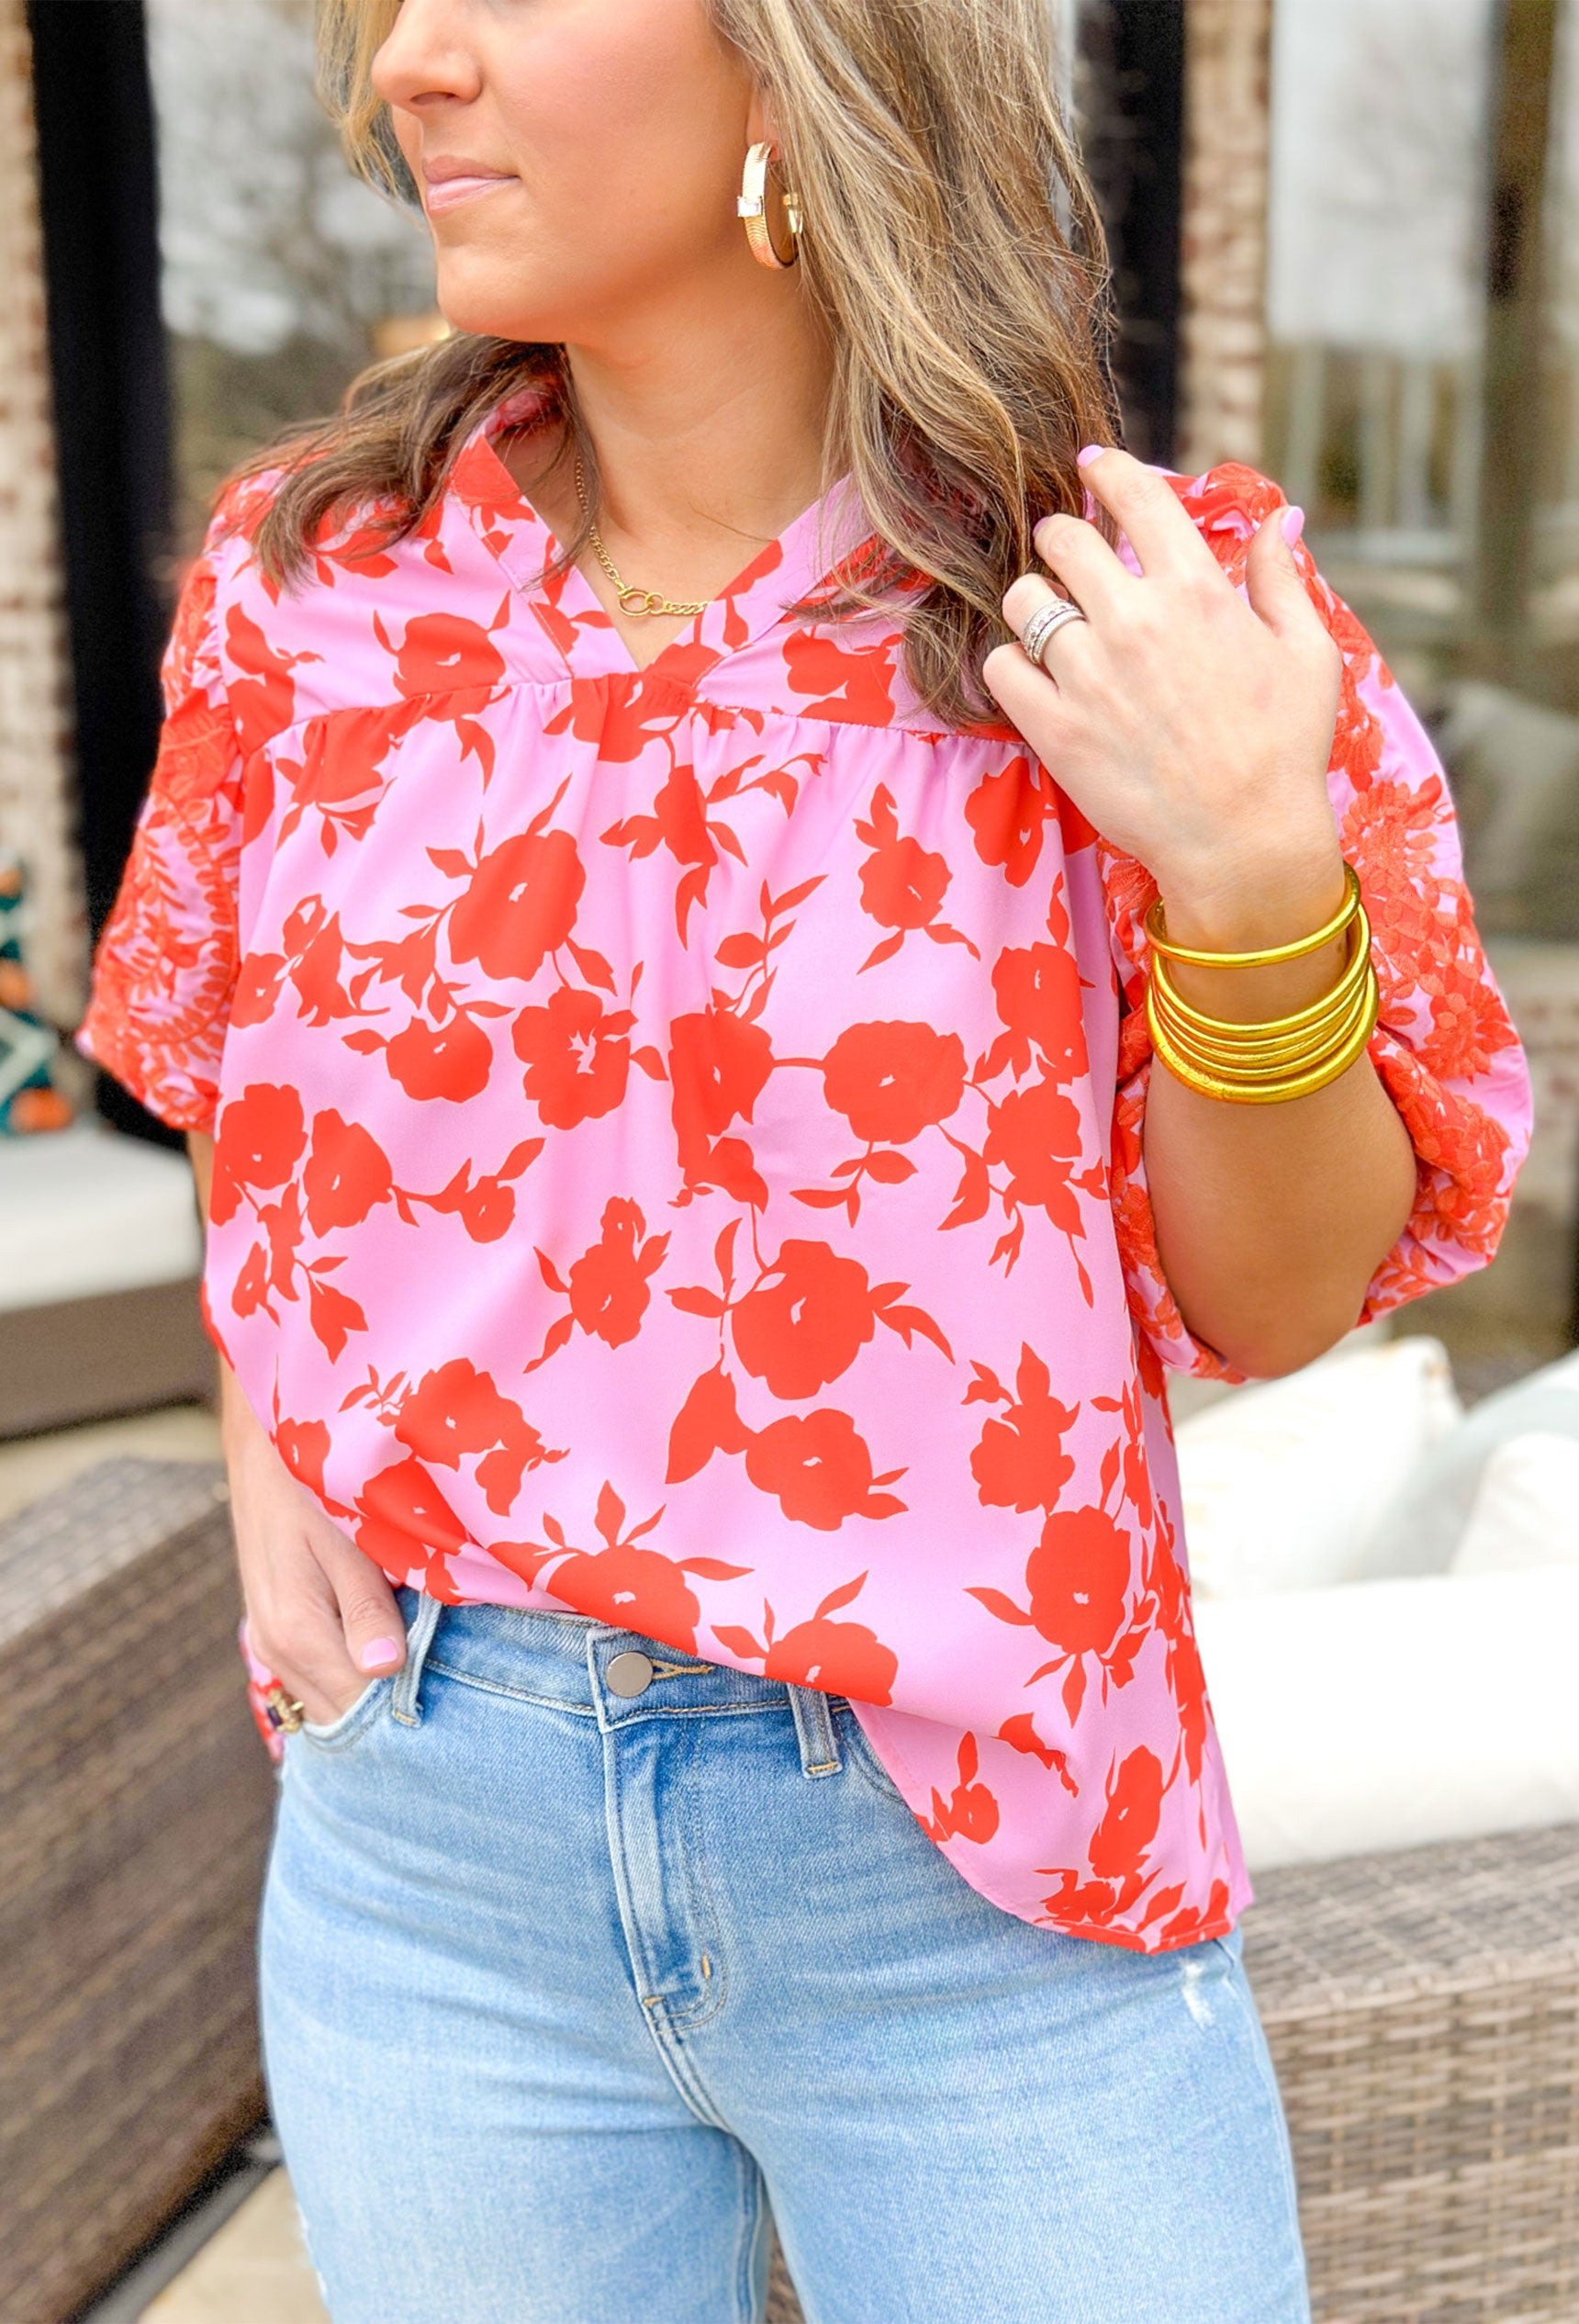 Melbourne Summers Floral Blouse, short puff sleeve blouse in light pink and tomato orange with floral print on the blouse and embroidered floral print on the sleeves